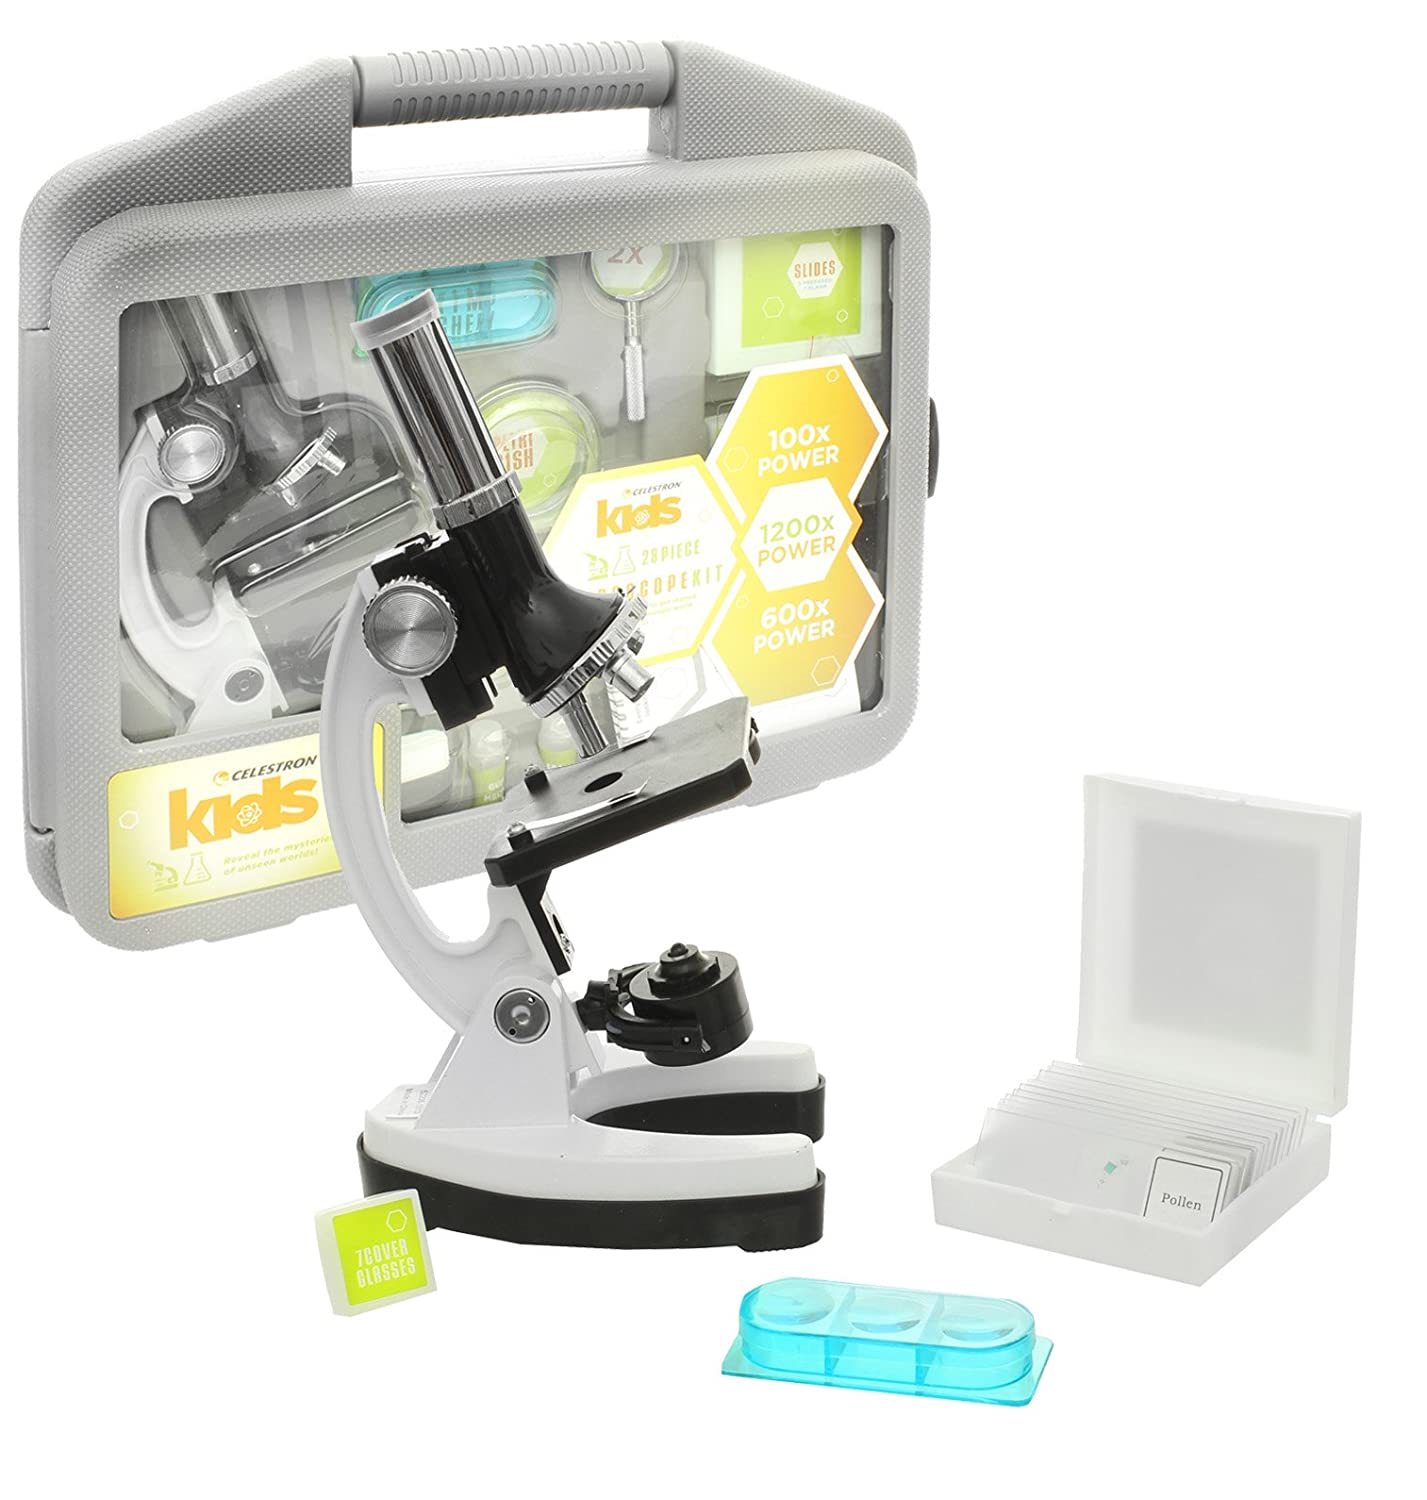 Top 10 Best Microscope for Kids Reviews in 2022 3